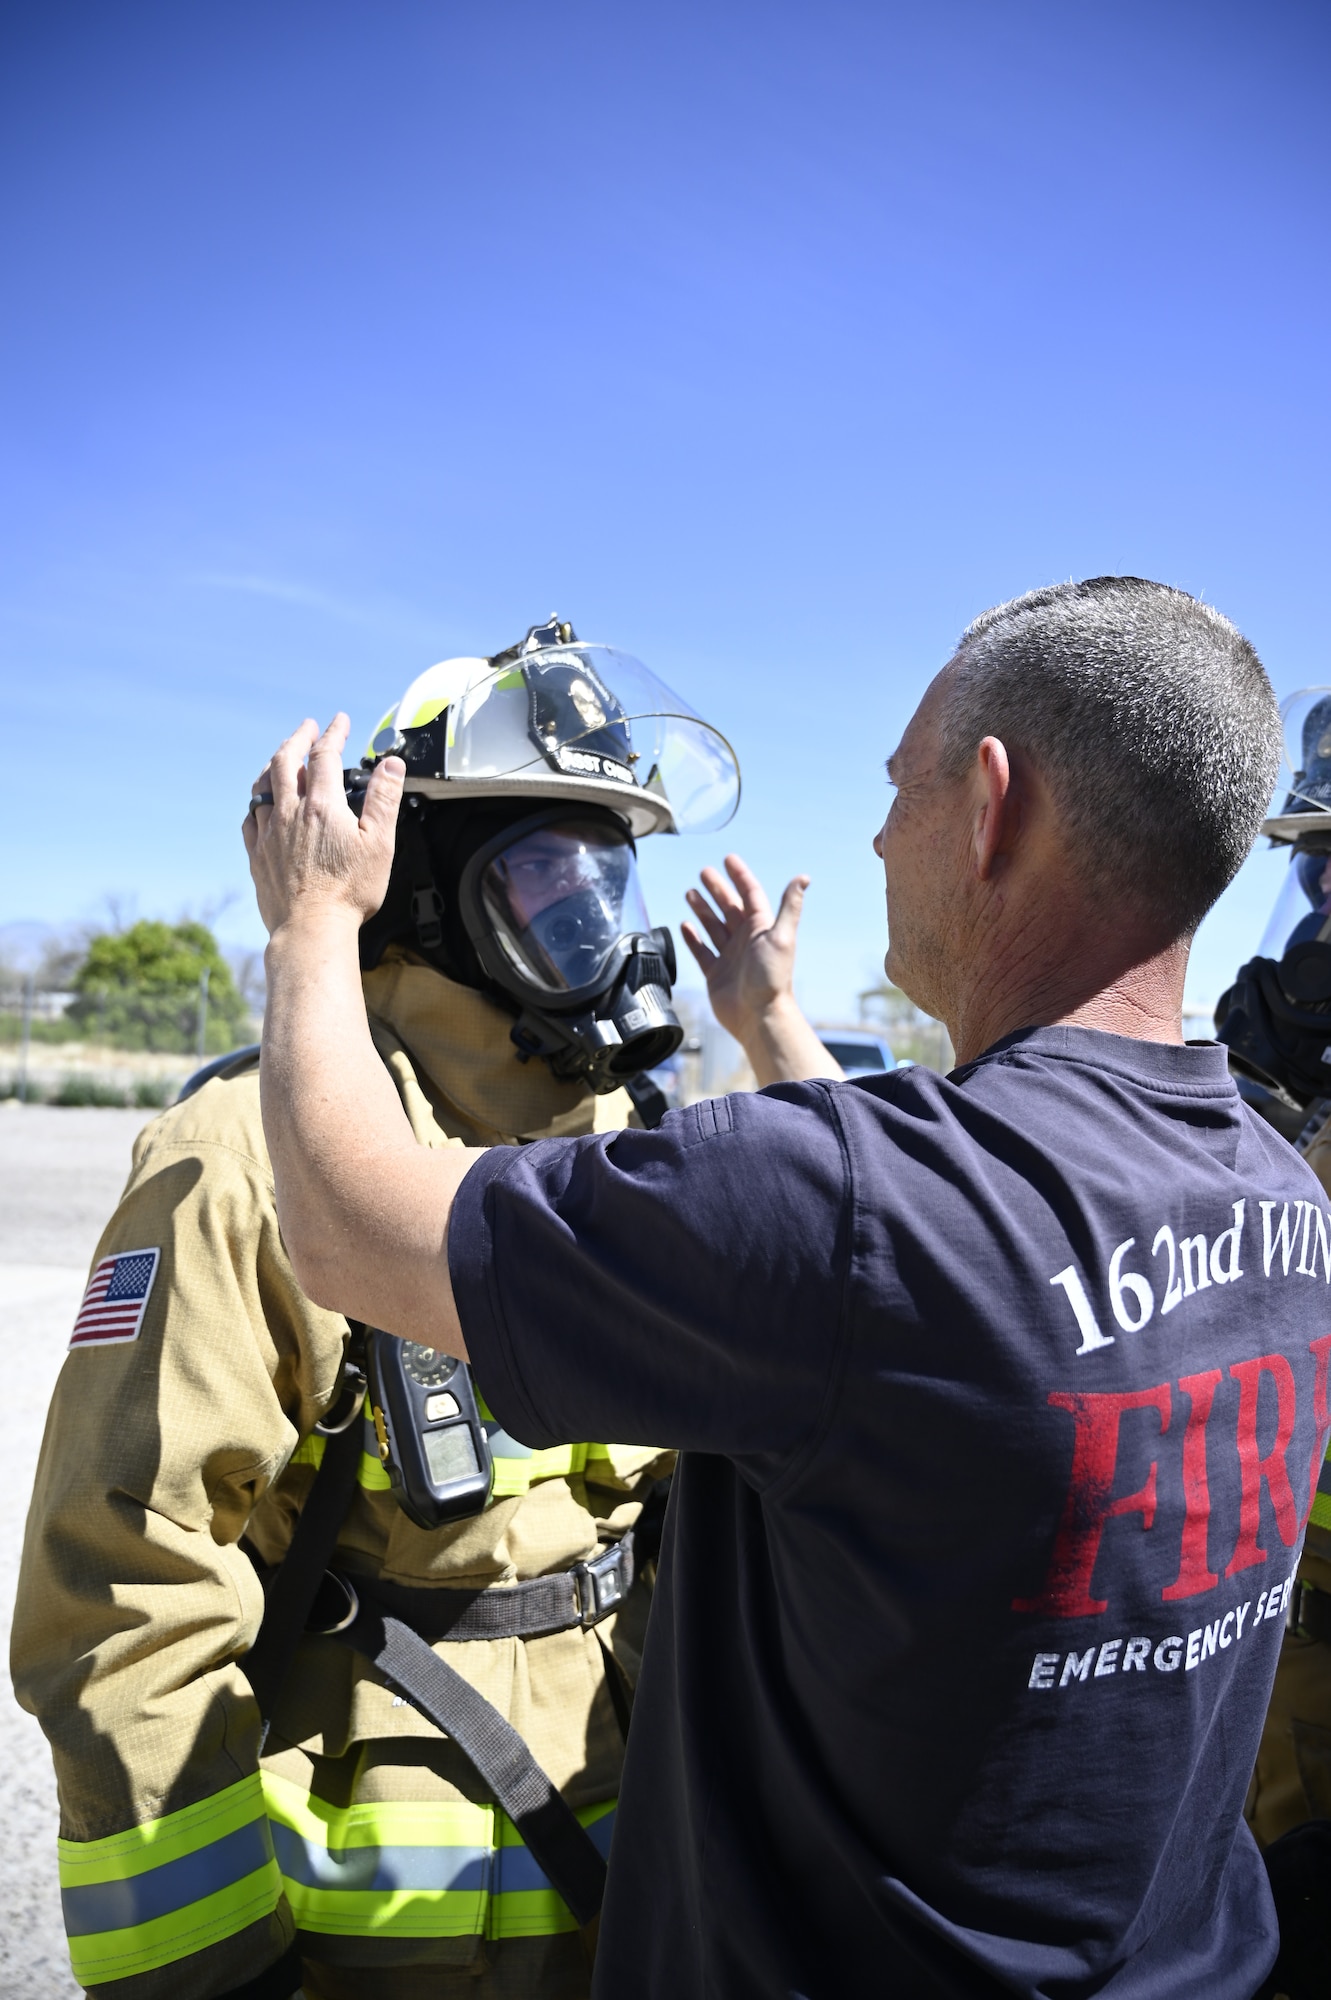 Joe Linehan, a firefighter with the 162nd Civil Engineer Squadron, helps his commander, Lt. Col. Paul Boriack, adjust his gear in preparation for live-fire training at Davis-Monthan Air Force Base, Arizona. Guardsmen from the 162nd Wing partner with firefighters at D-M every year to conduct realistic and dynaimc training at the active duty base's robust facilities. (U.S. Air National Guard photo by Maj. Mary Hook)